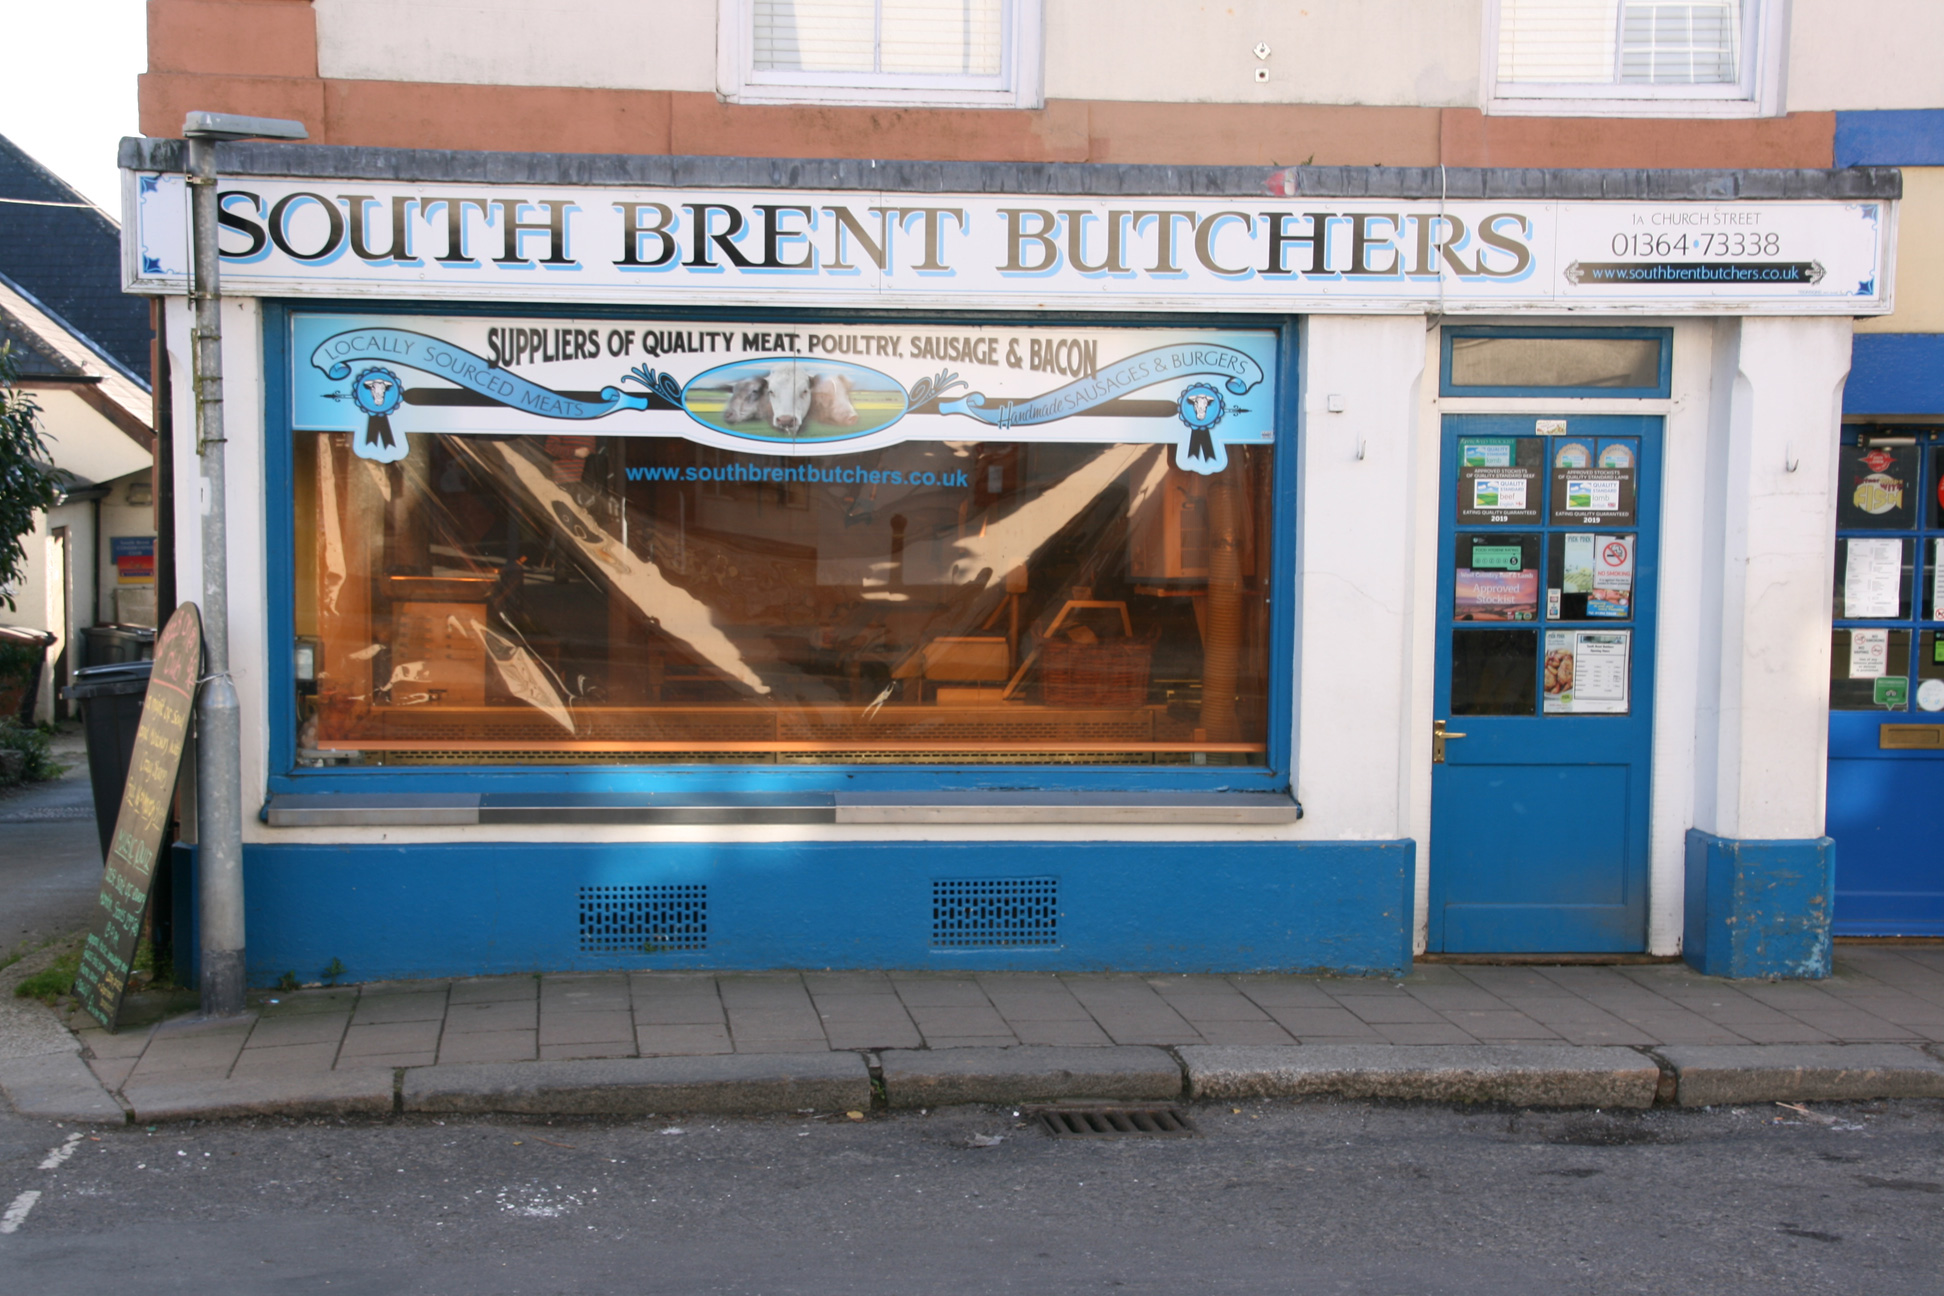 South Brent Butchers